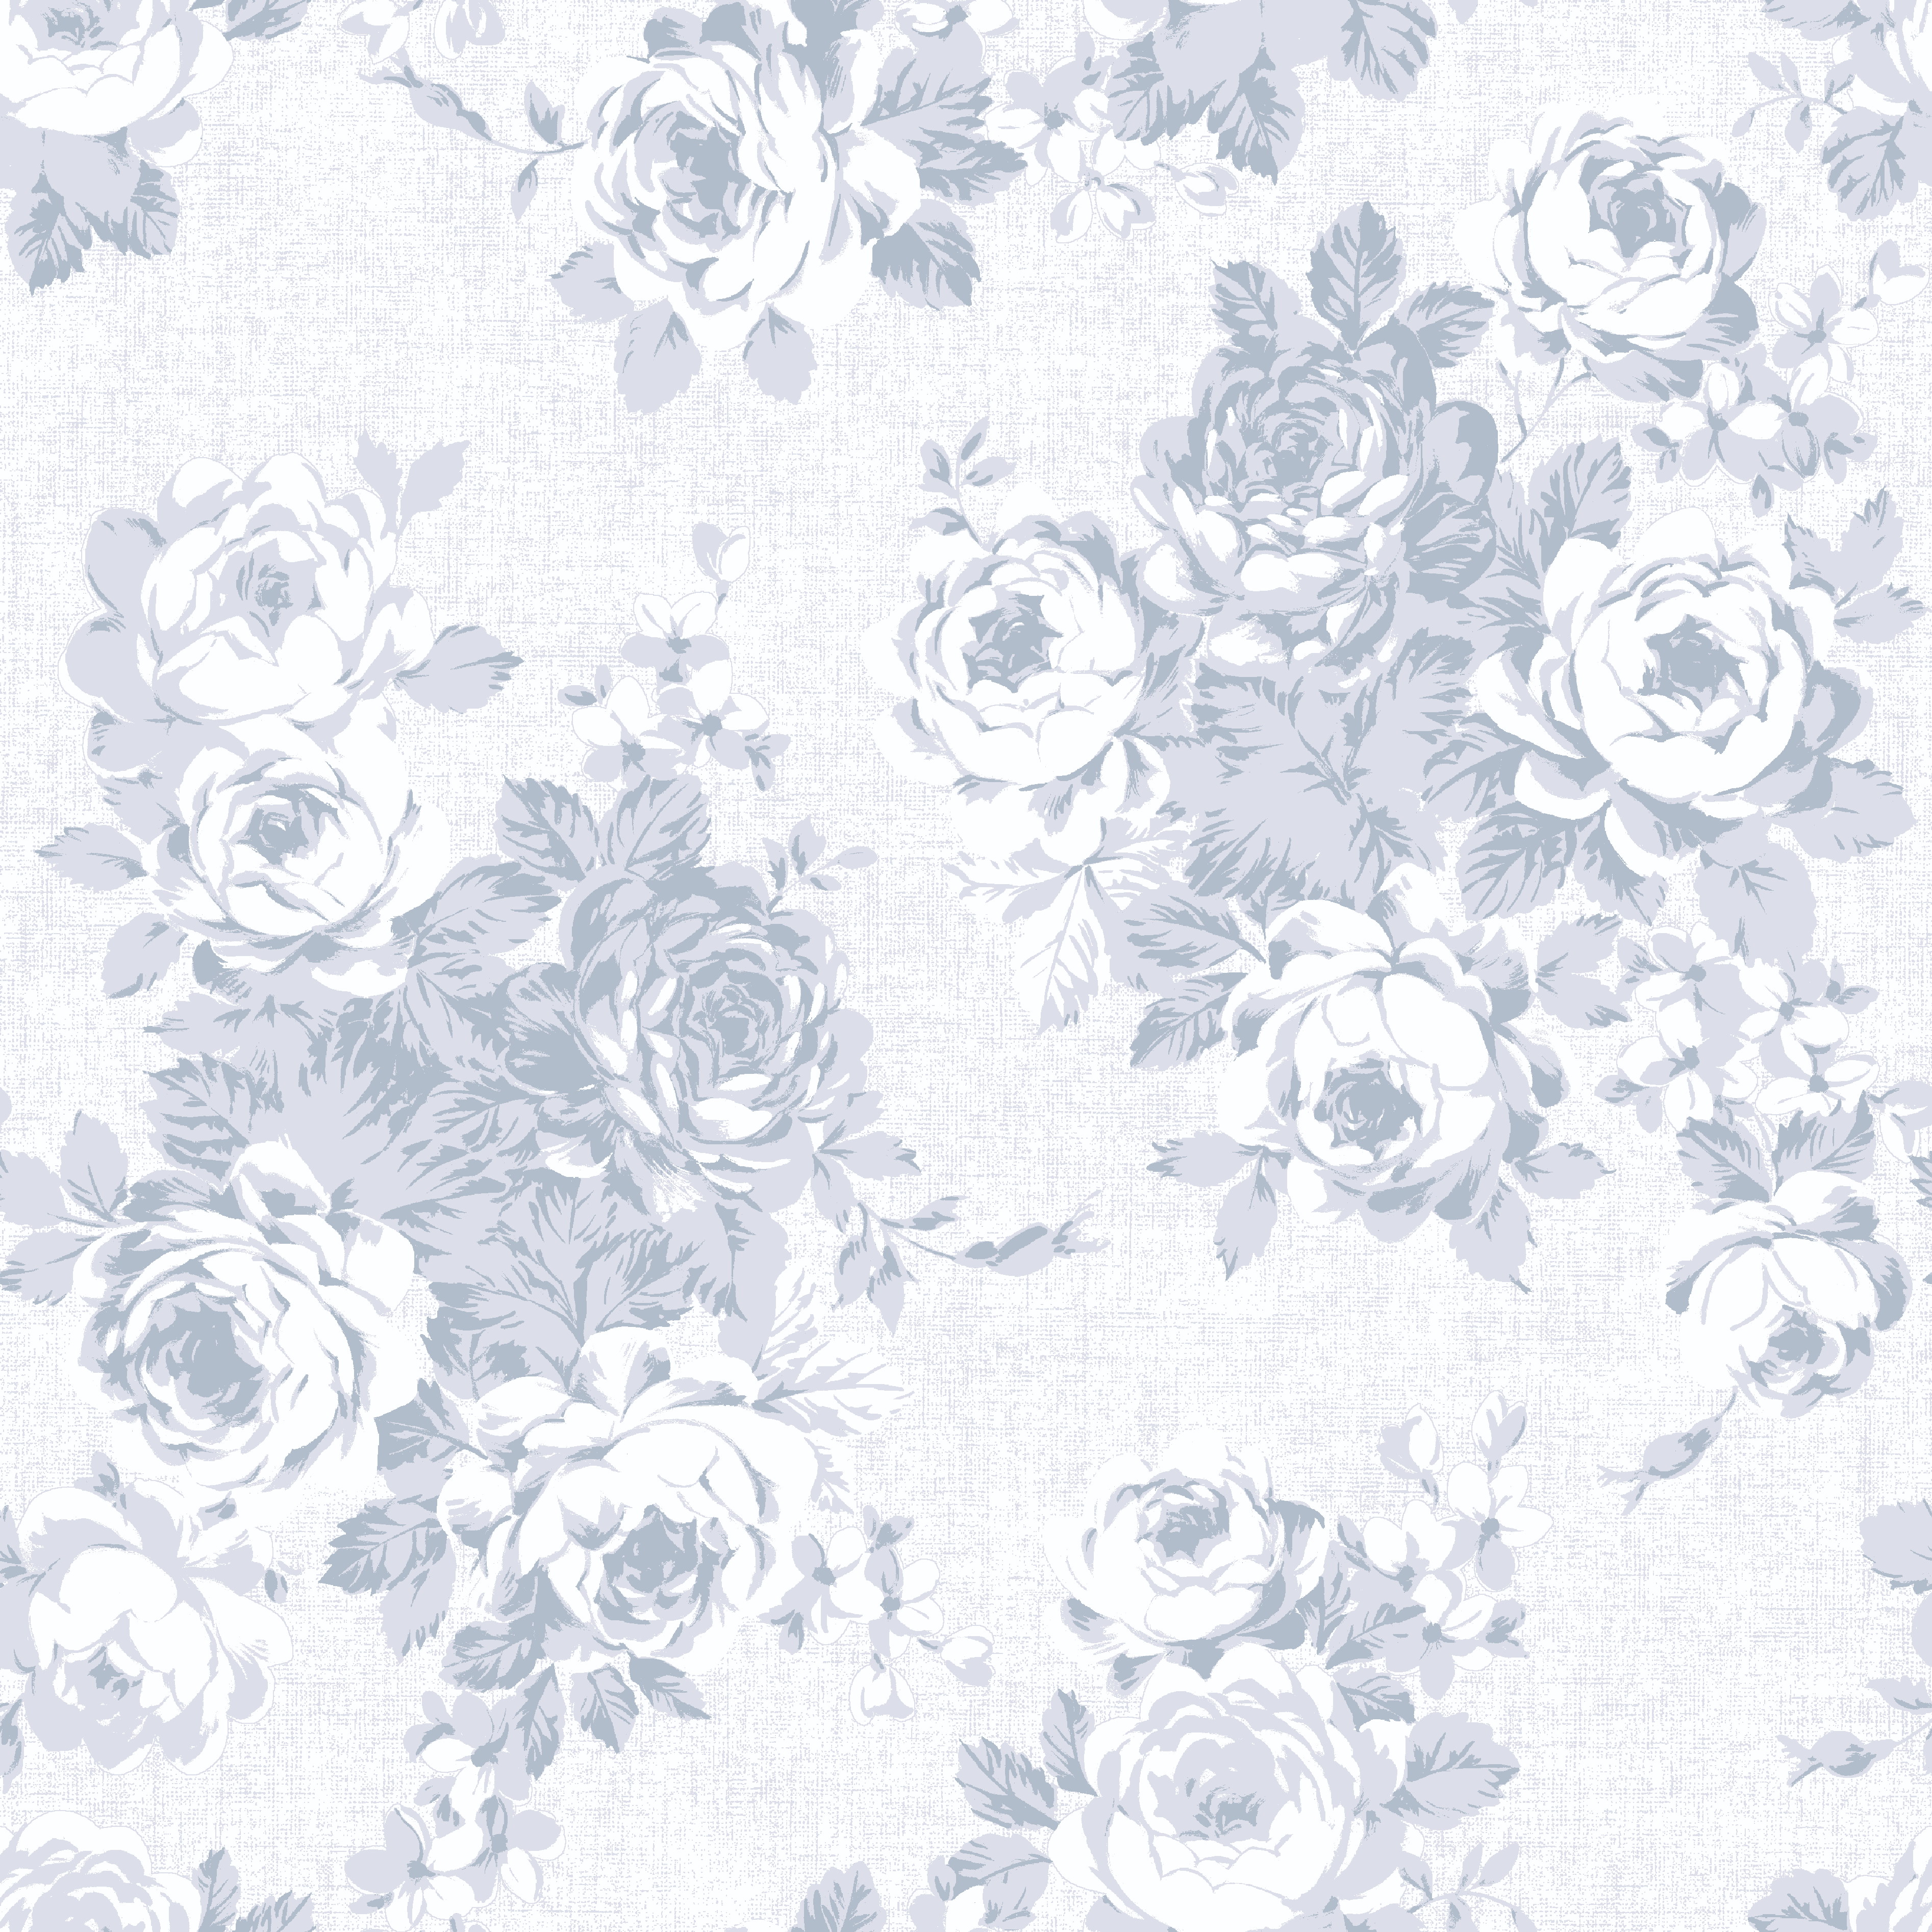 Waverly Inspirations 44" 100% Cotton Floral Sewing & Craft Fabric By the Yard, Gray